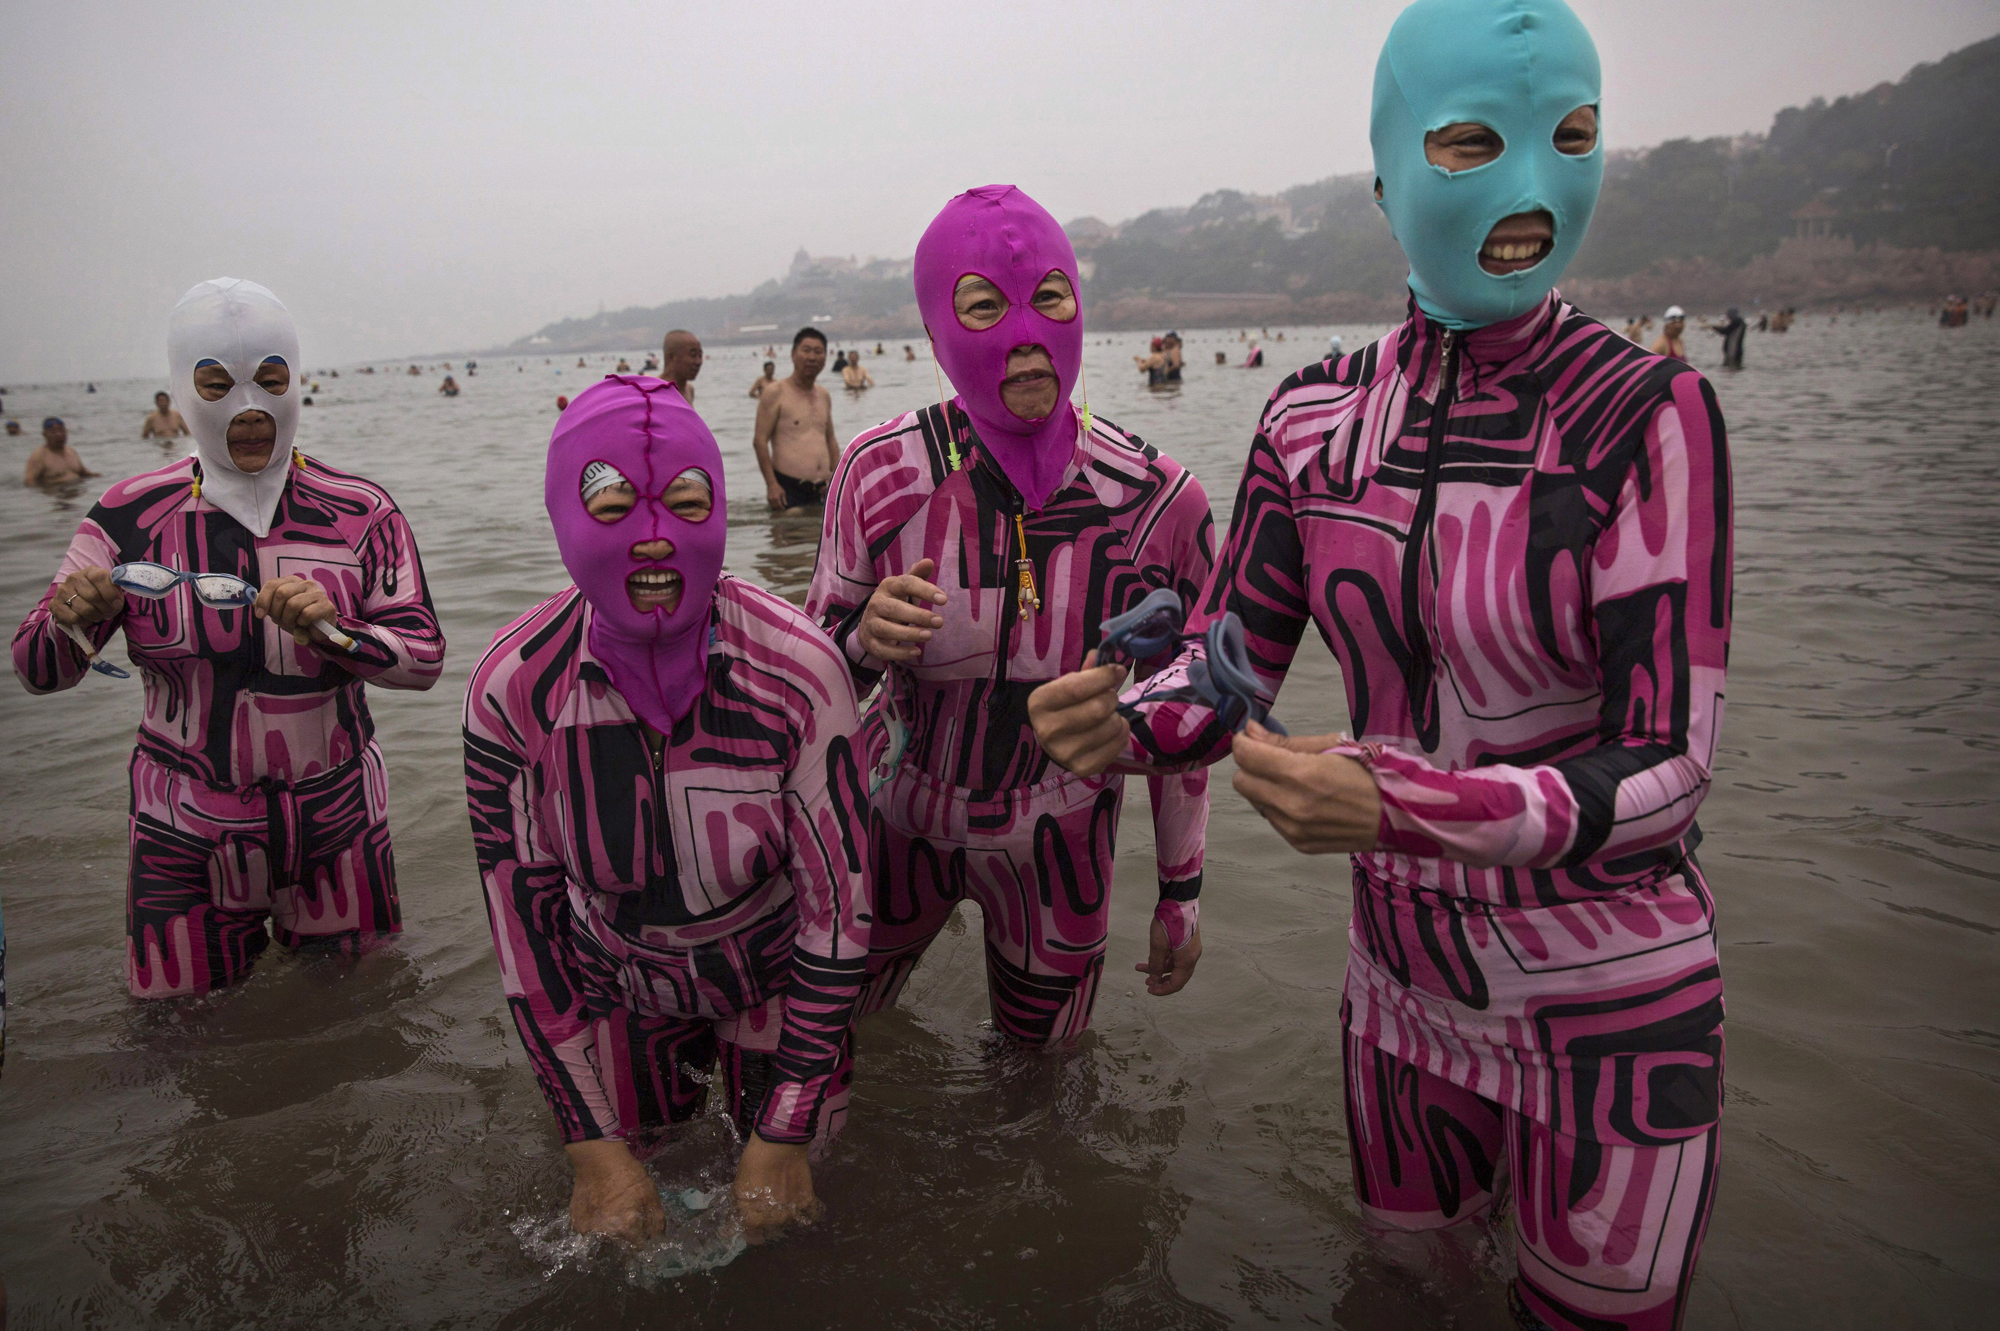 Chinese women wear face-kinis as they stand in the water on Aug. 20, 2014 on the Yellow Sea in Qingdao, China.